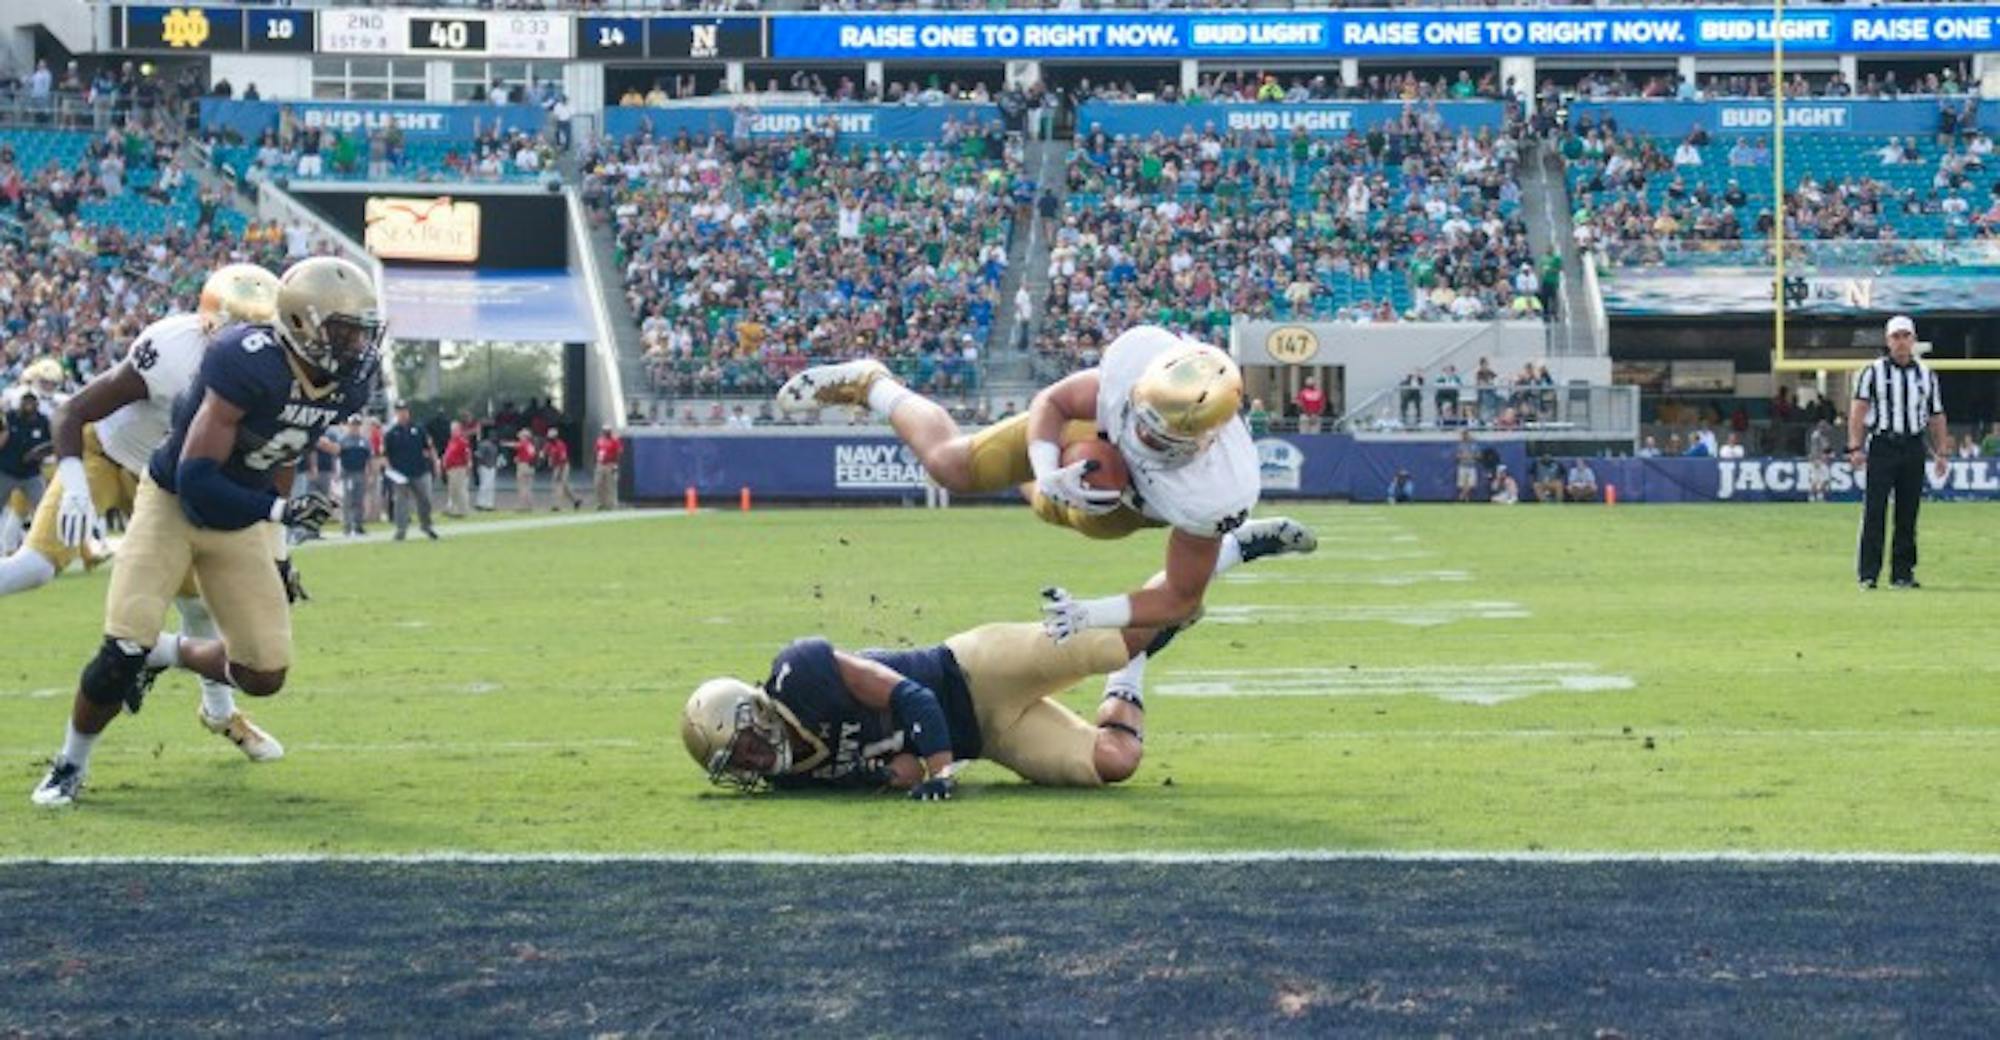 Durham Smythe scores on an 8 yard touchdown reception to give Notre Dame a 17-14 lead.